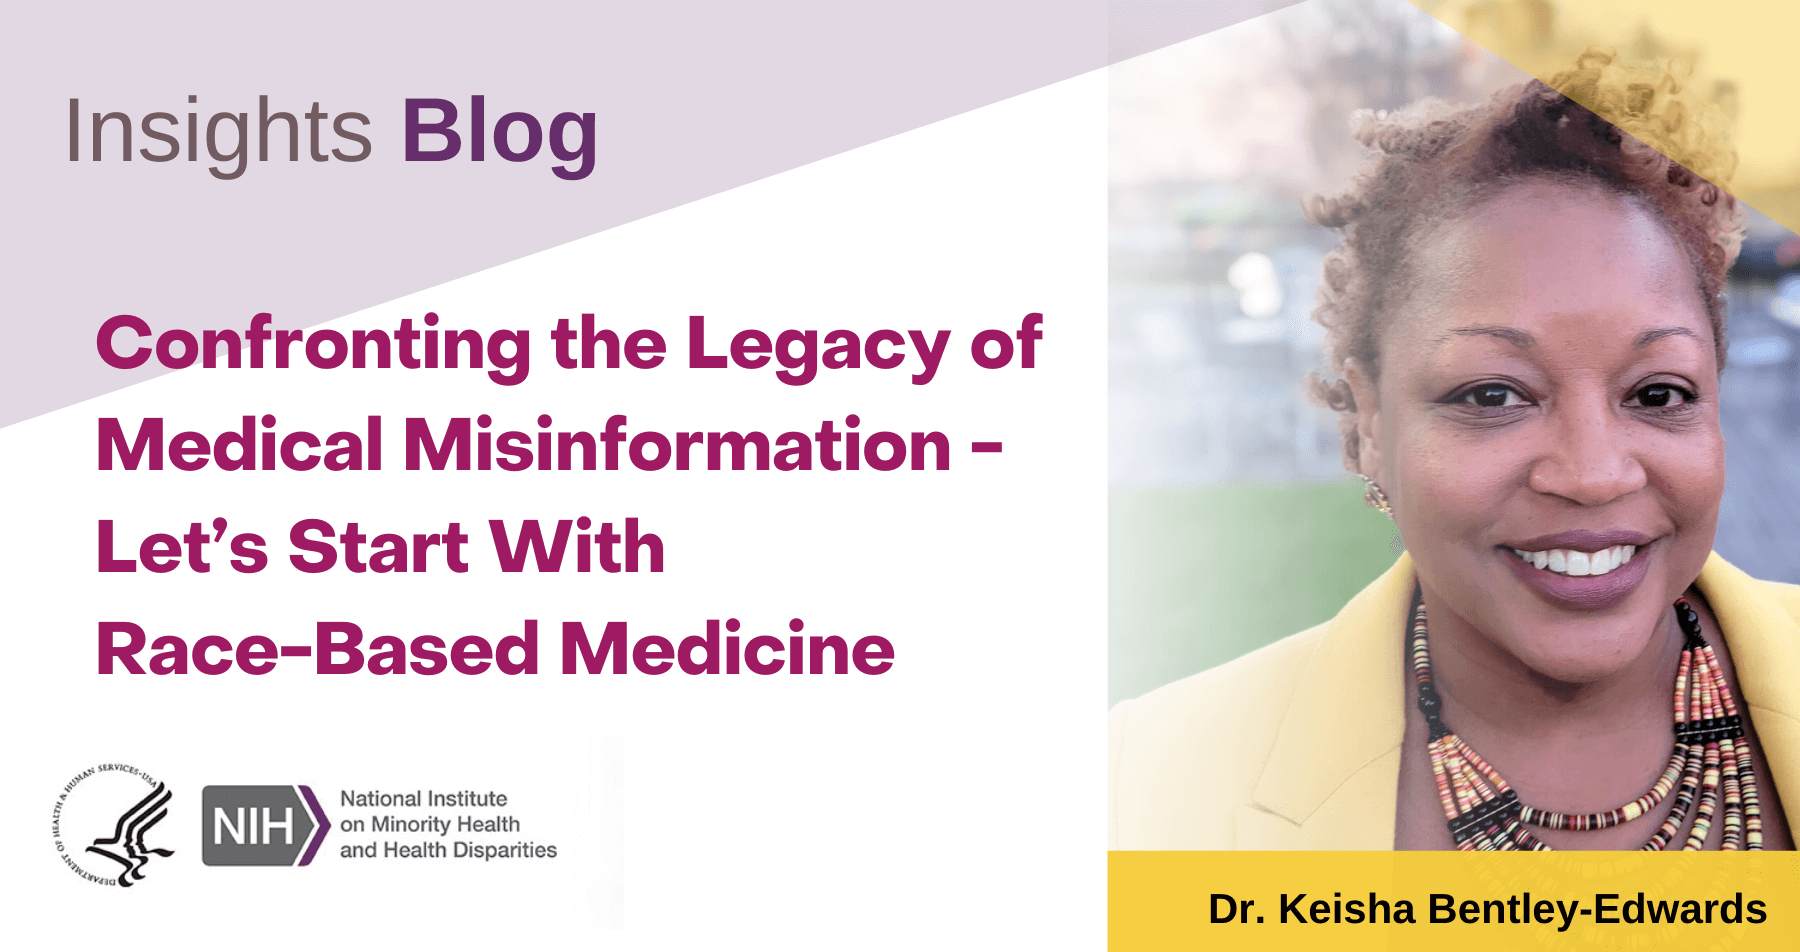 Insights Blog: Confronting the Legacy of Medical Misinformation - Let's Start With Race-Based Medicine, photo of author Dr. Keisha Bentley-Edwards